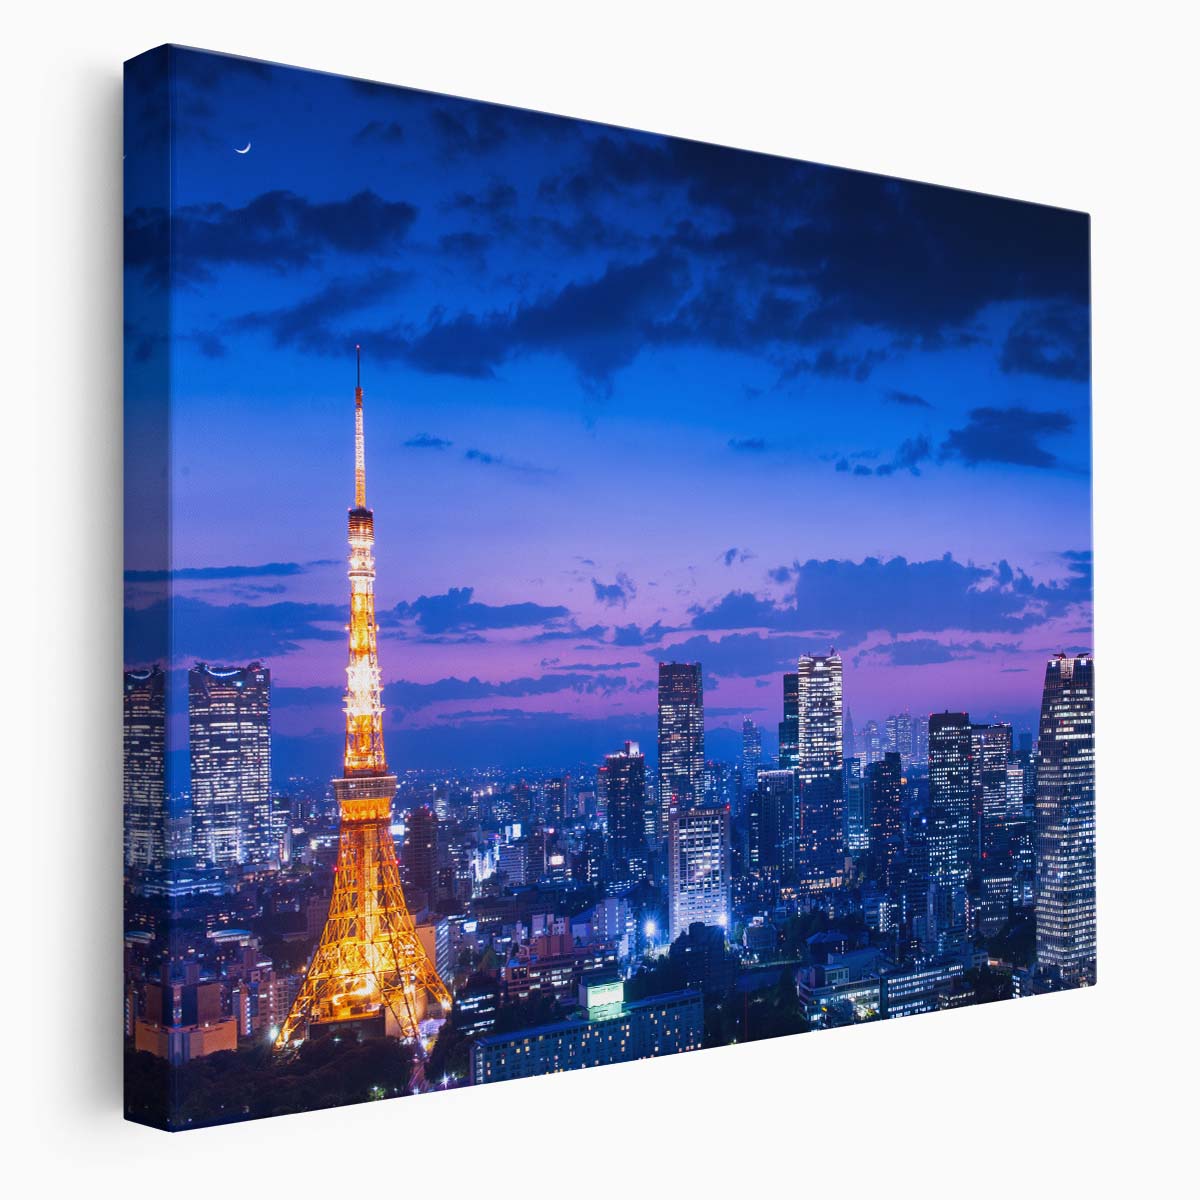 Tokyo Tower Golden Twilight Cityscape Wall Art by Luxuriance Designs. Made in USA.